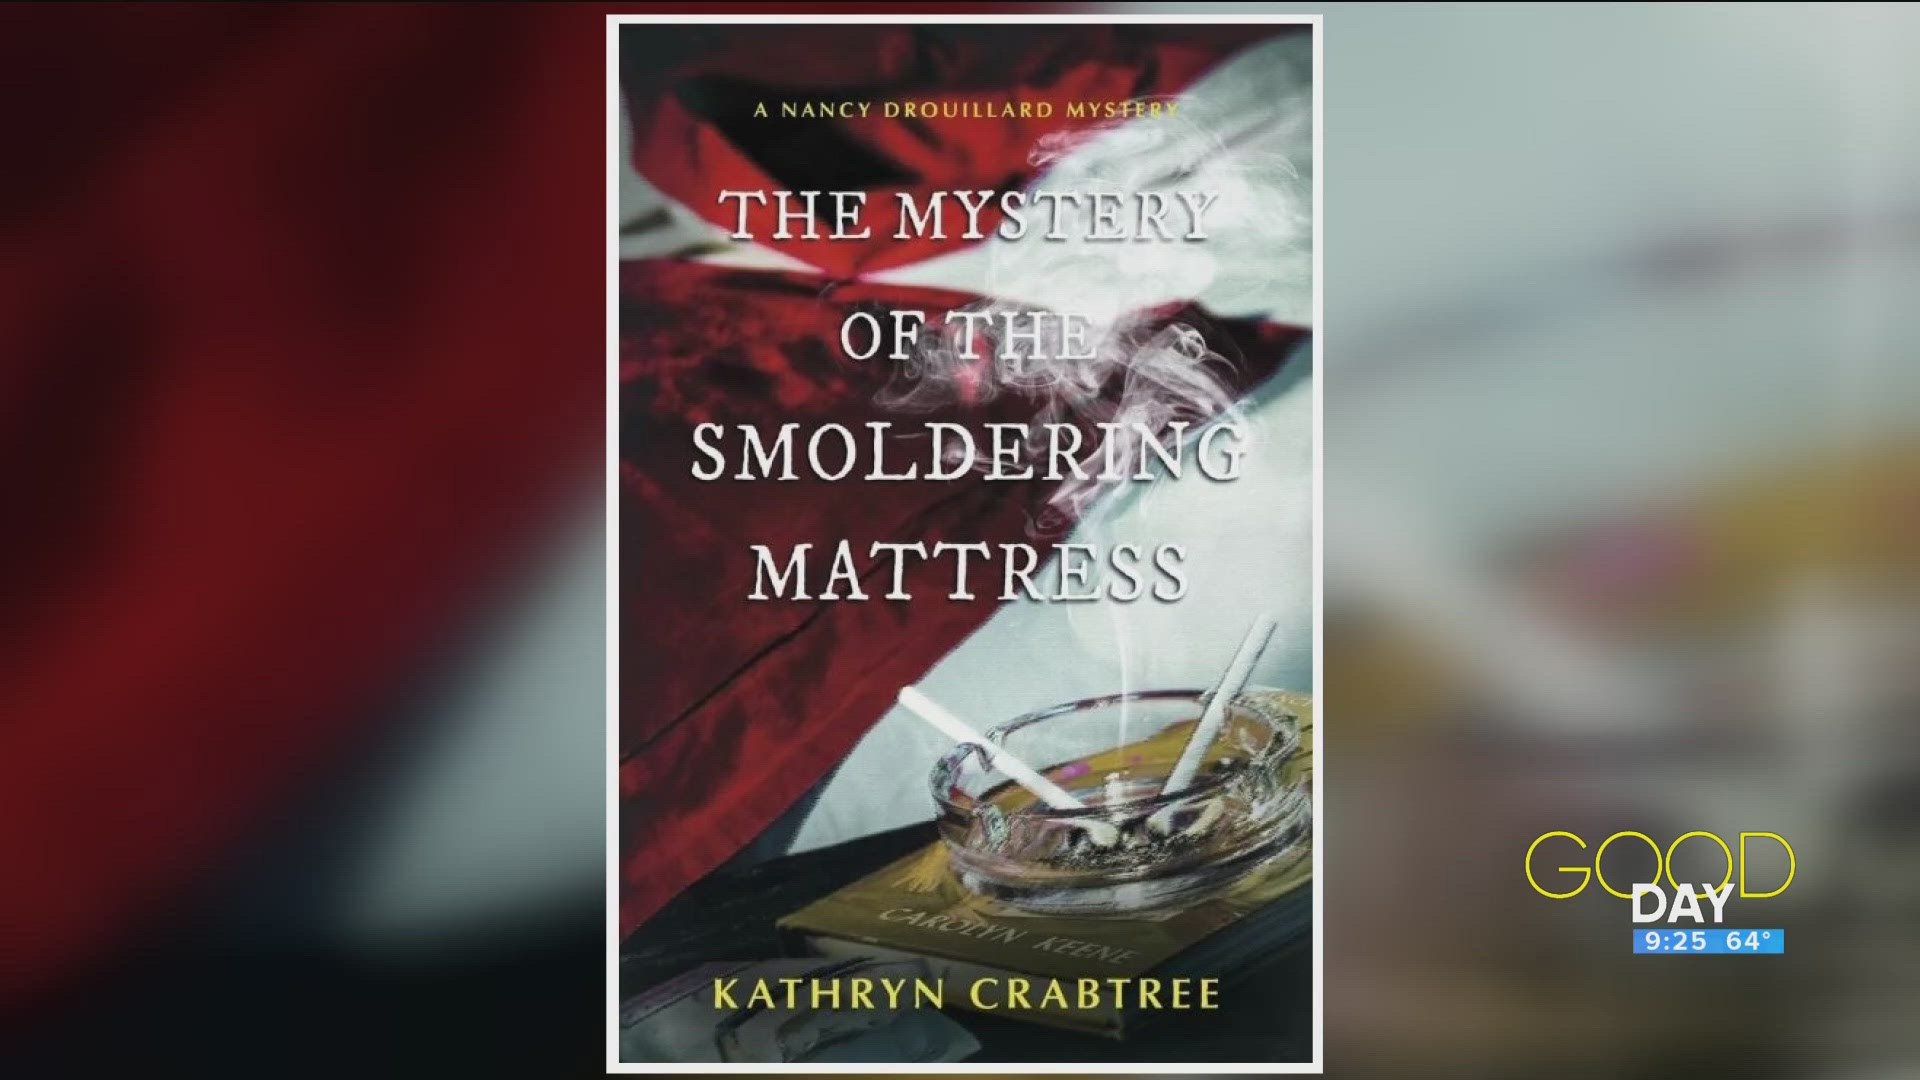 Kathryn Crabtree talks her first novel, 'The Mystery of the Smoldering mattress'.